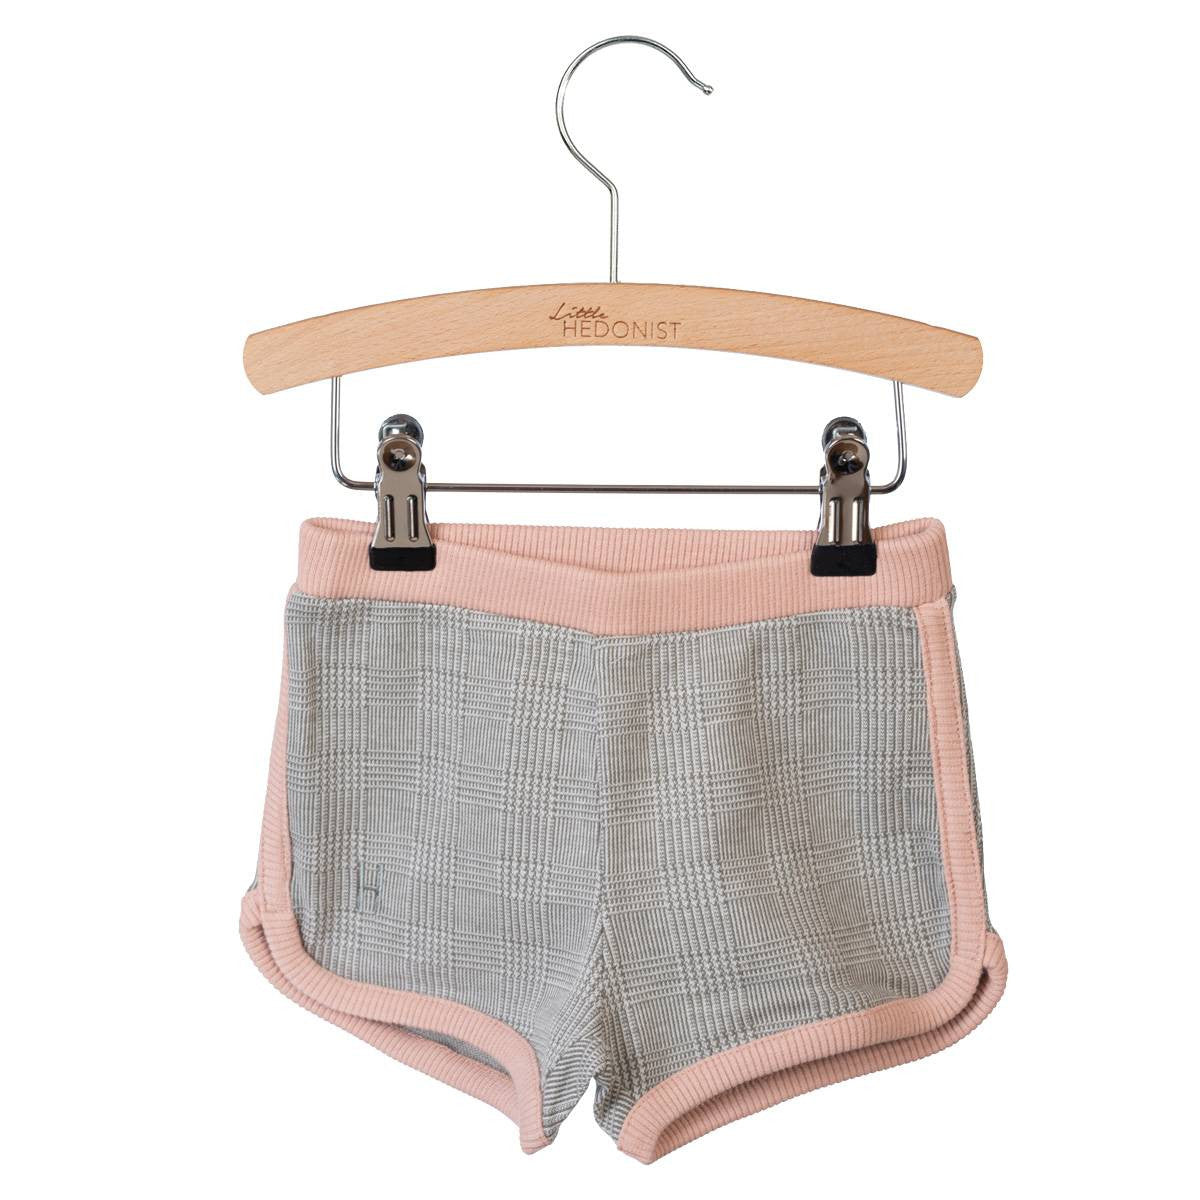 These Little Hedonist shorts are made from the softest organic babysweat you can imagine. This comfy sweatshorts has got a tight fit and a waistband with a thick rubber band.